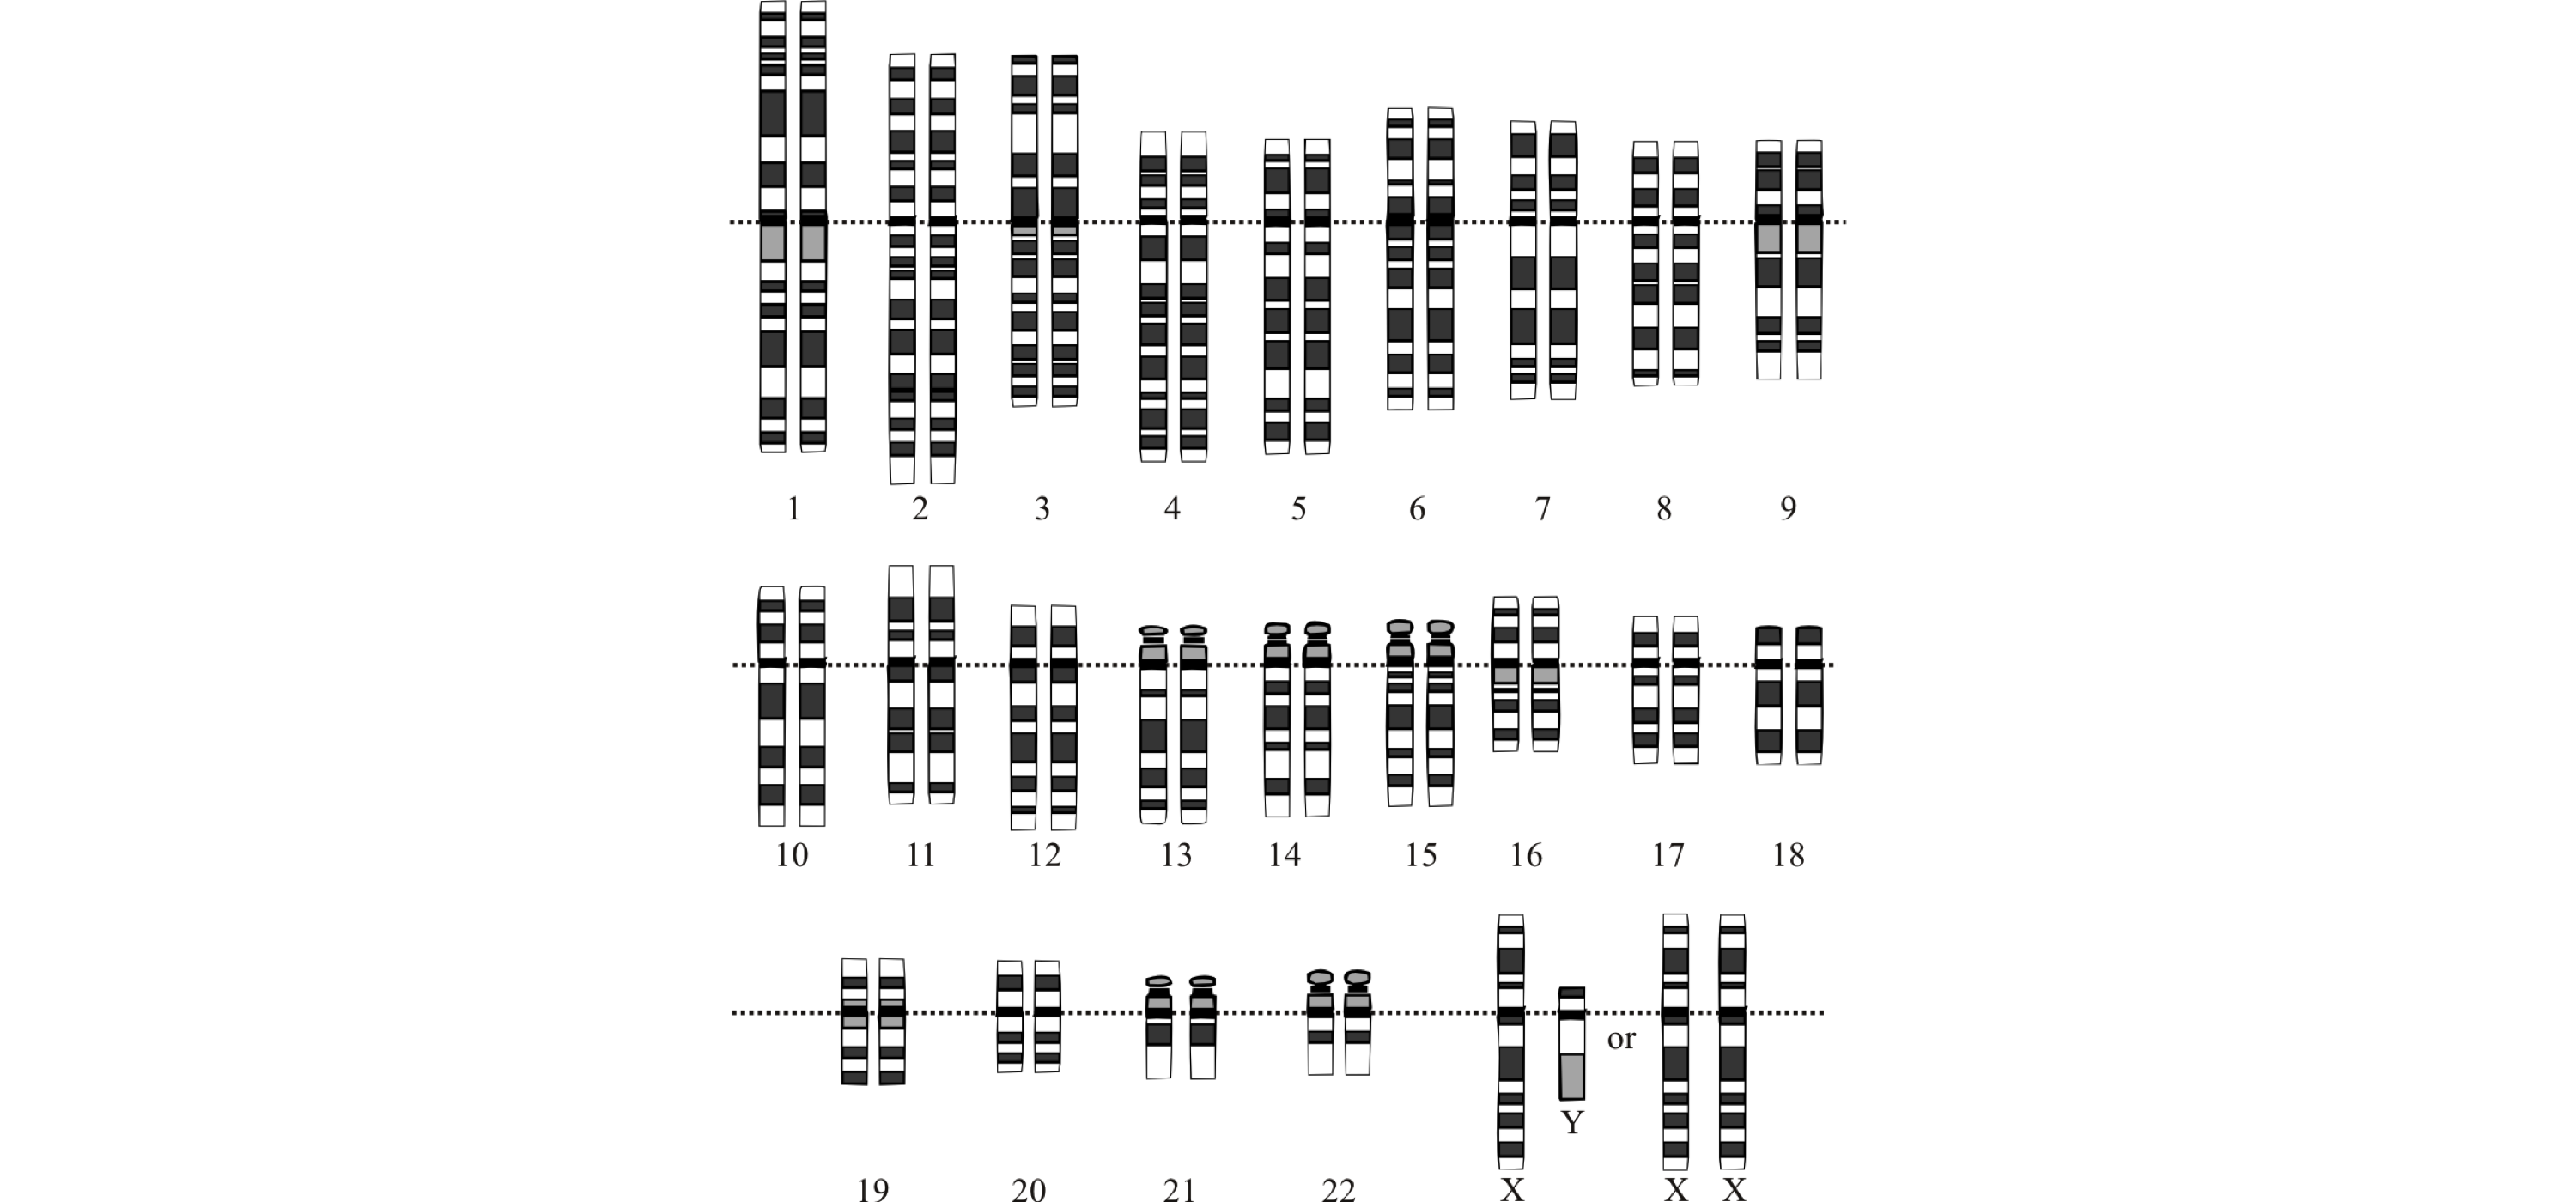 The idealized human diploid karyotype showing the organization of the genome into chromosomes